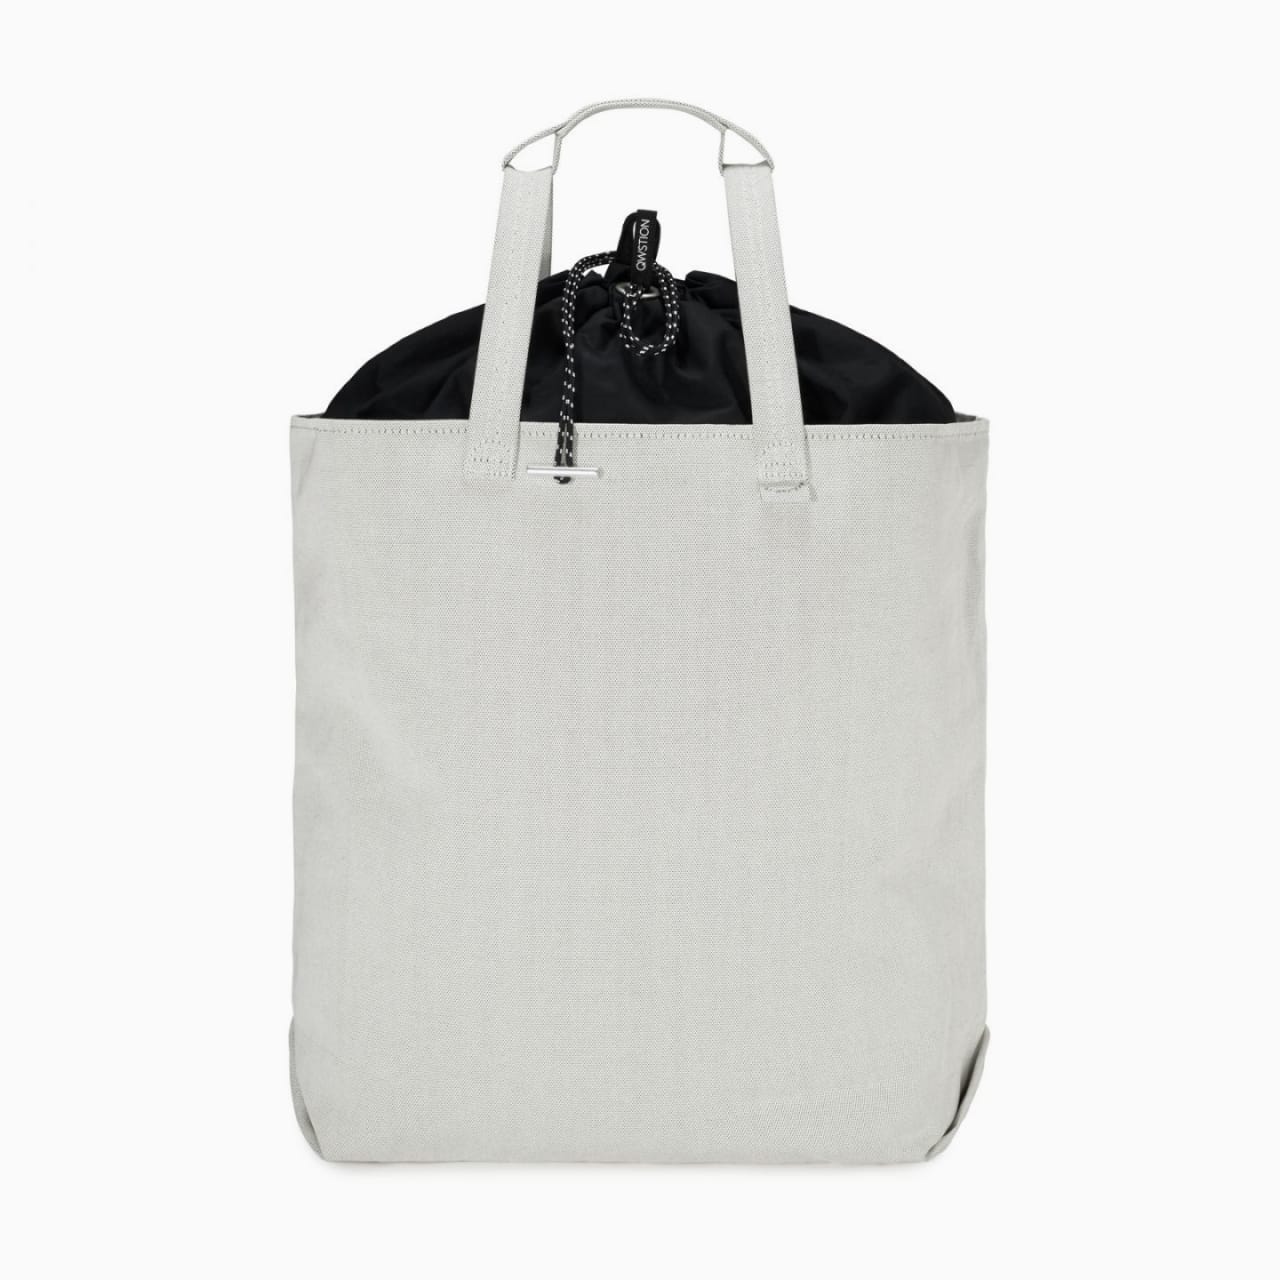 White canvas tote bag with black drawstring liner and white handle.